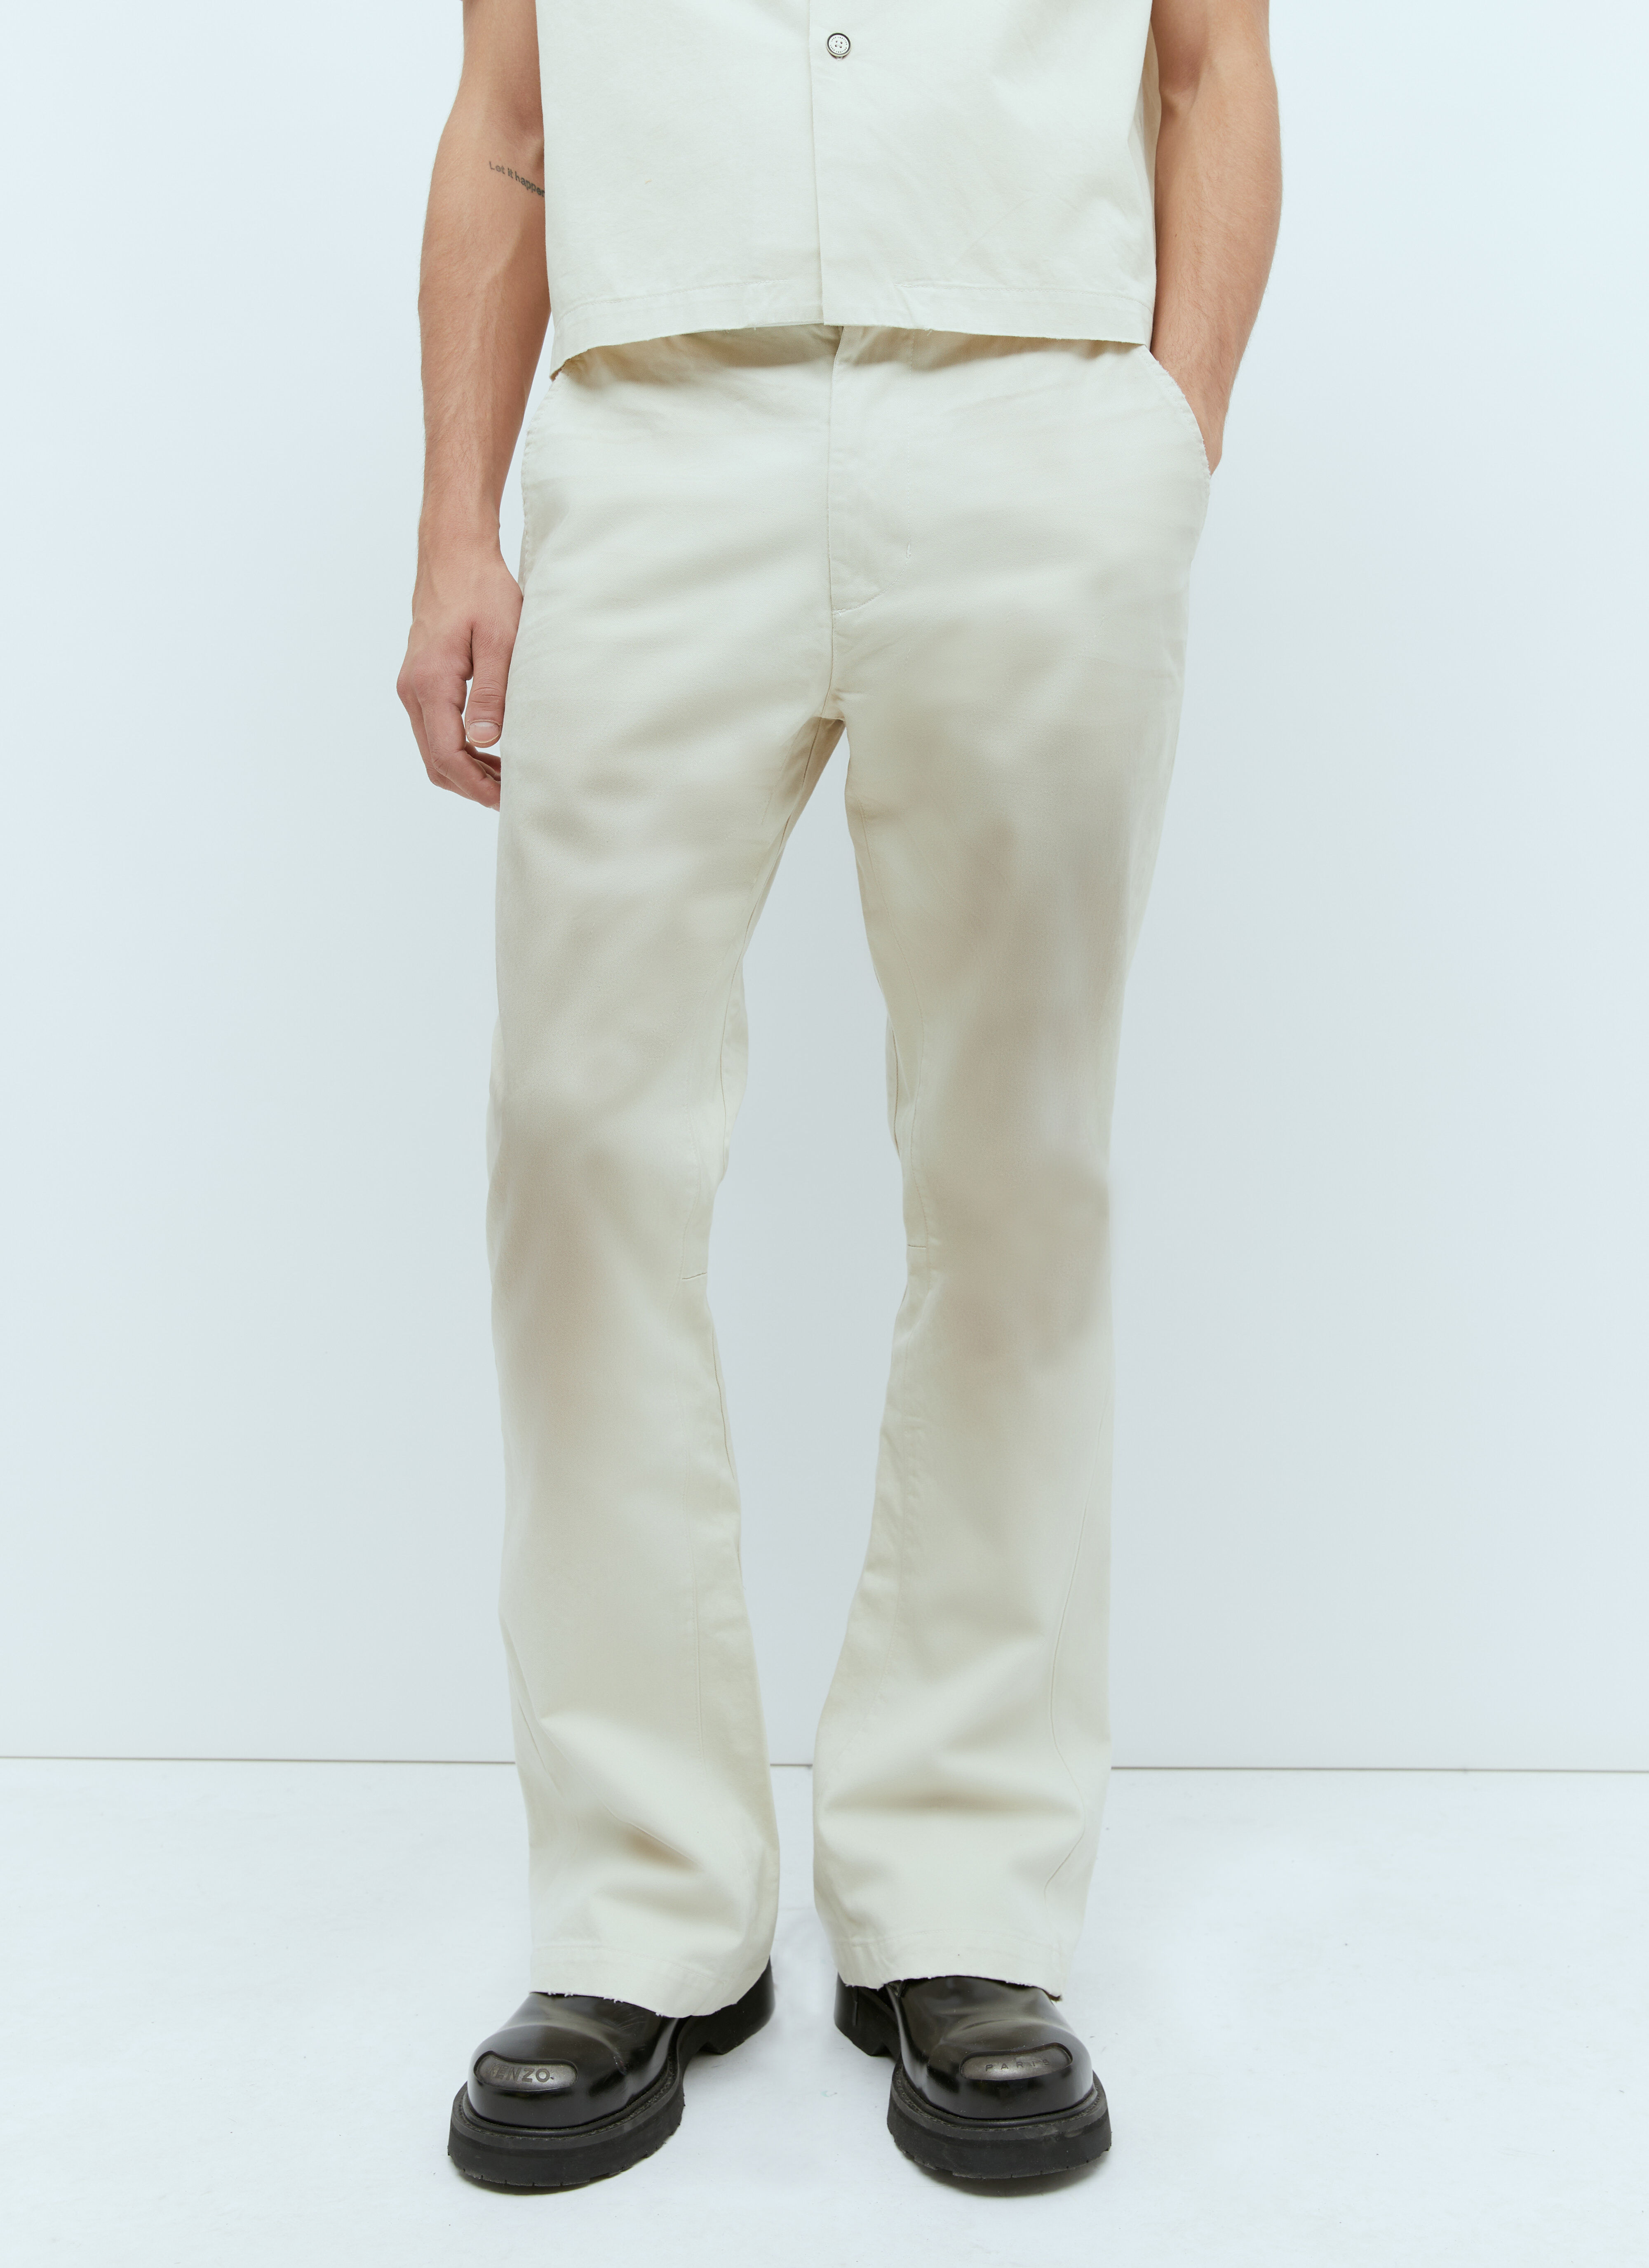 Gallery Dept. La Chino Flare Pants White gdp0153021